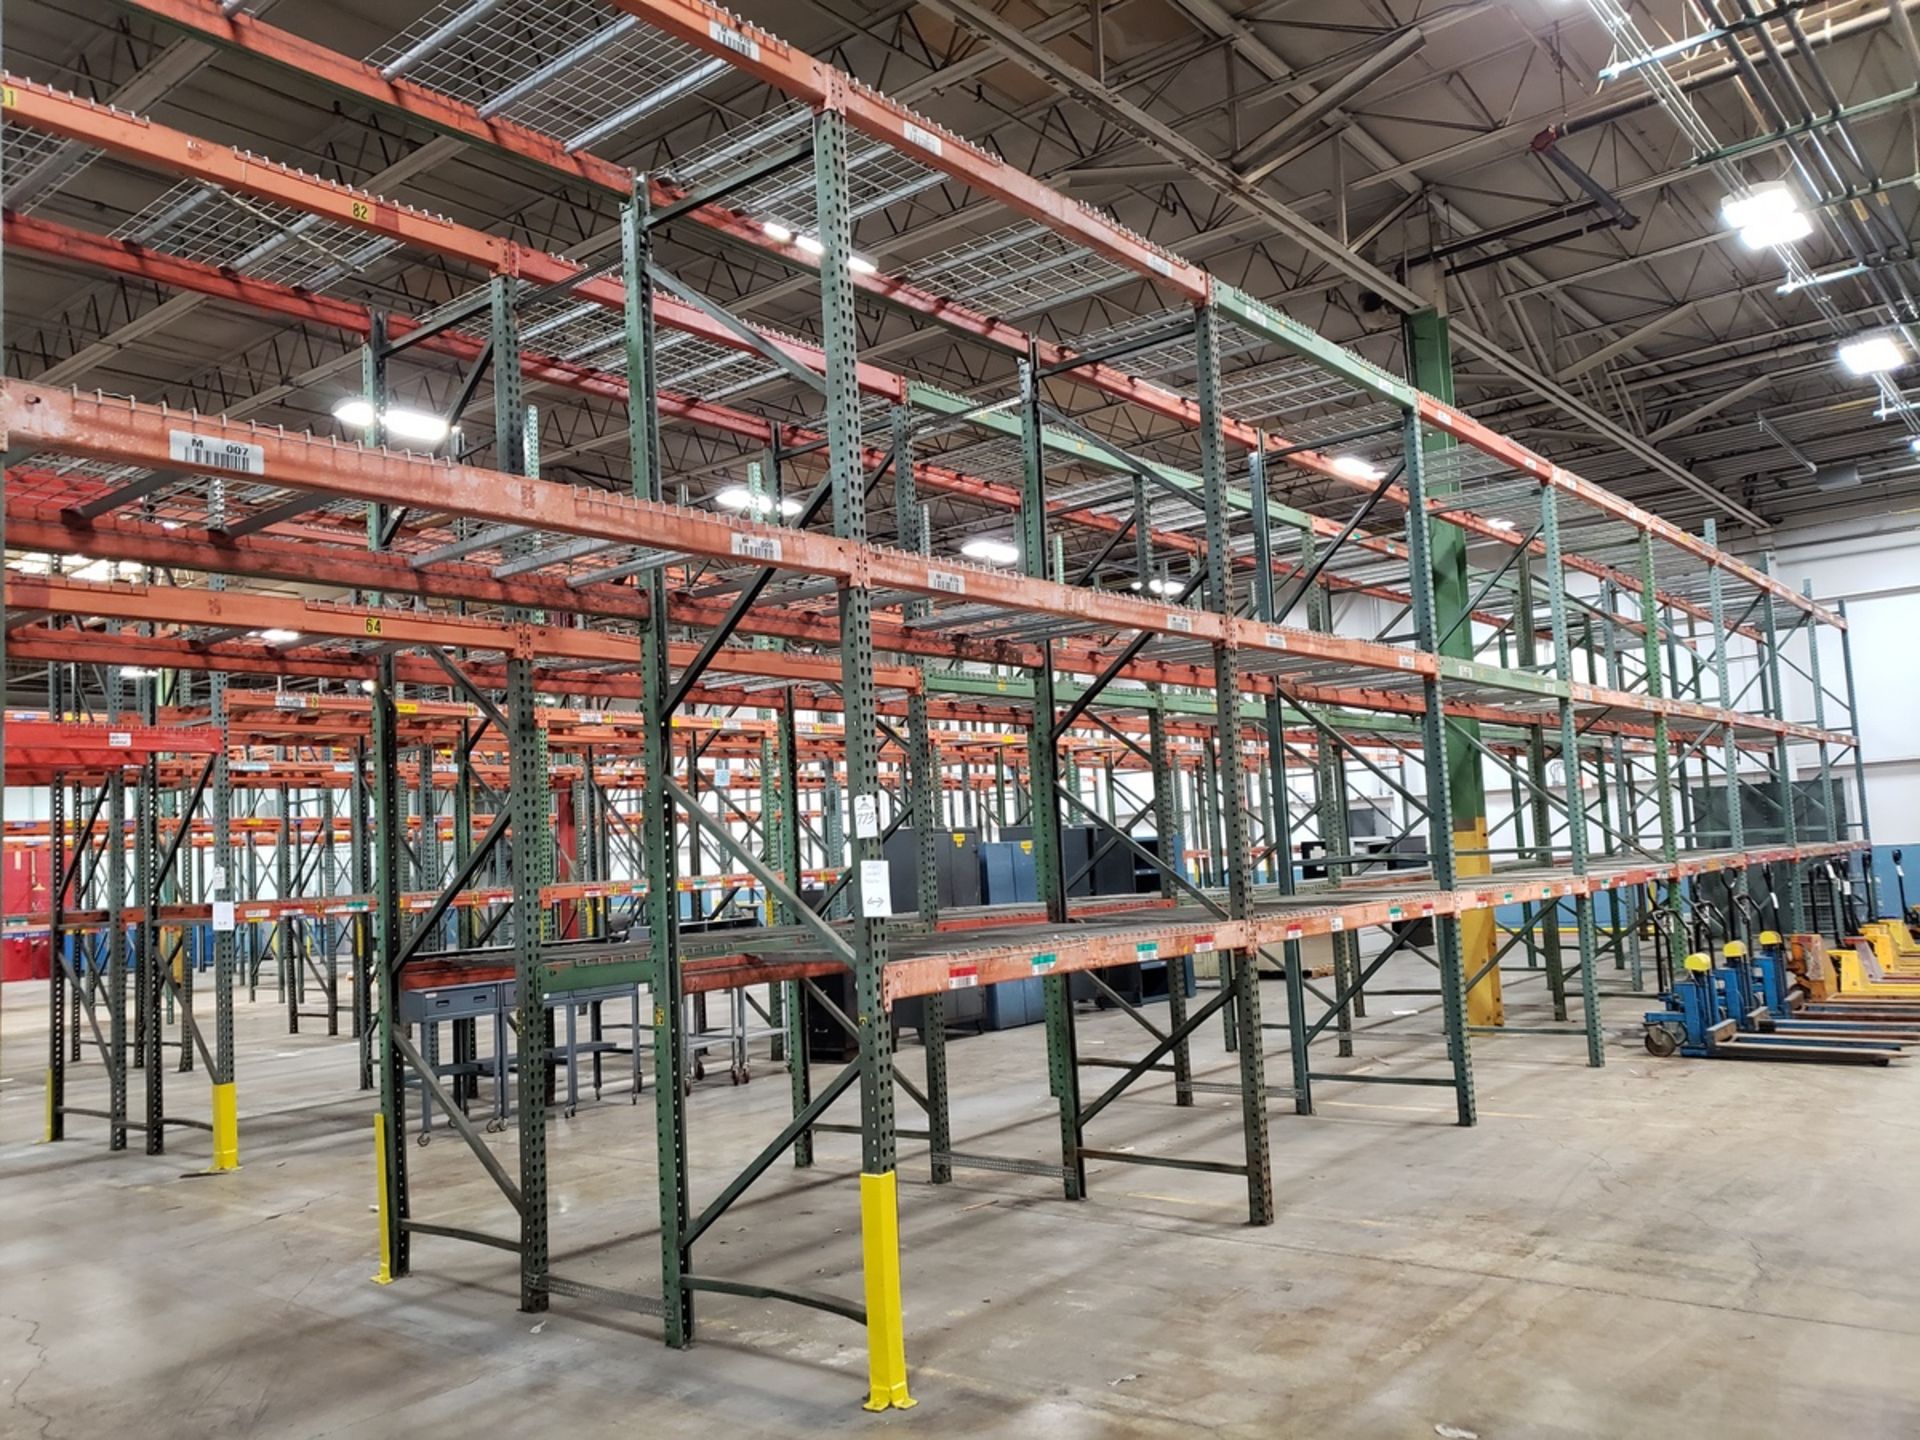 Pallet Rack Section, W/ (2) 42" X 18' Uprights, (4) 42" X 15' Upr - Subj to Bulk | Rig Fee: See Desc